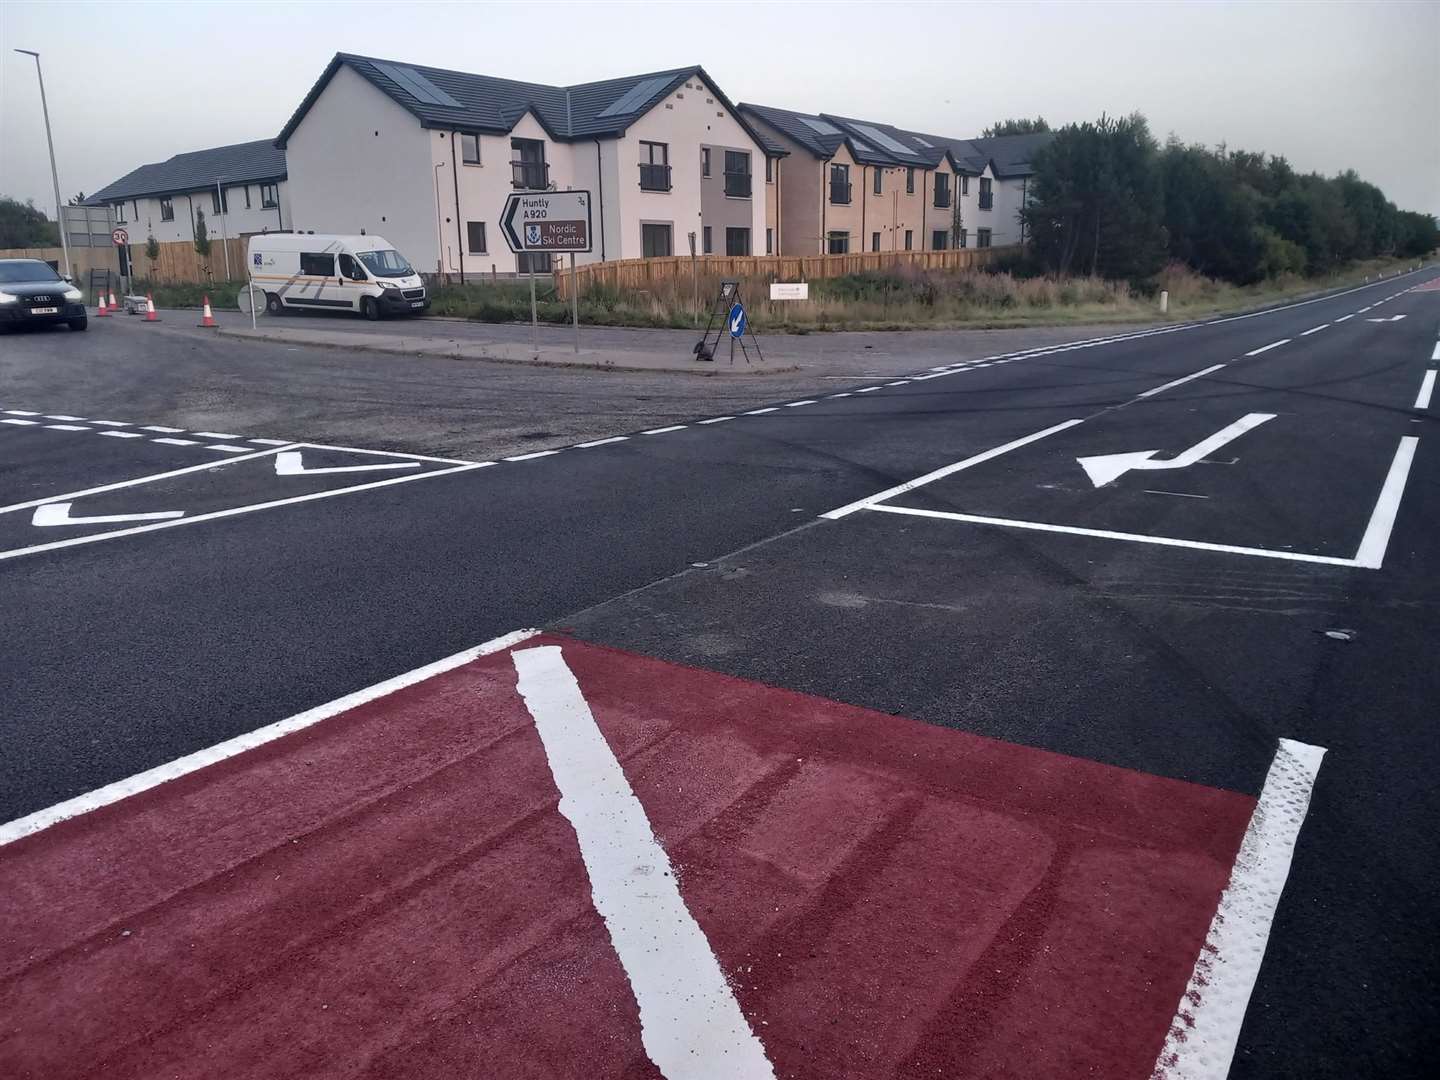 New images show the upgrade work which has been completed on the A96/A290 junction